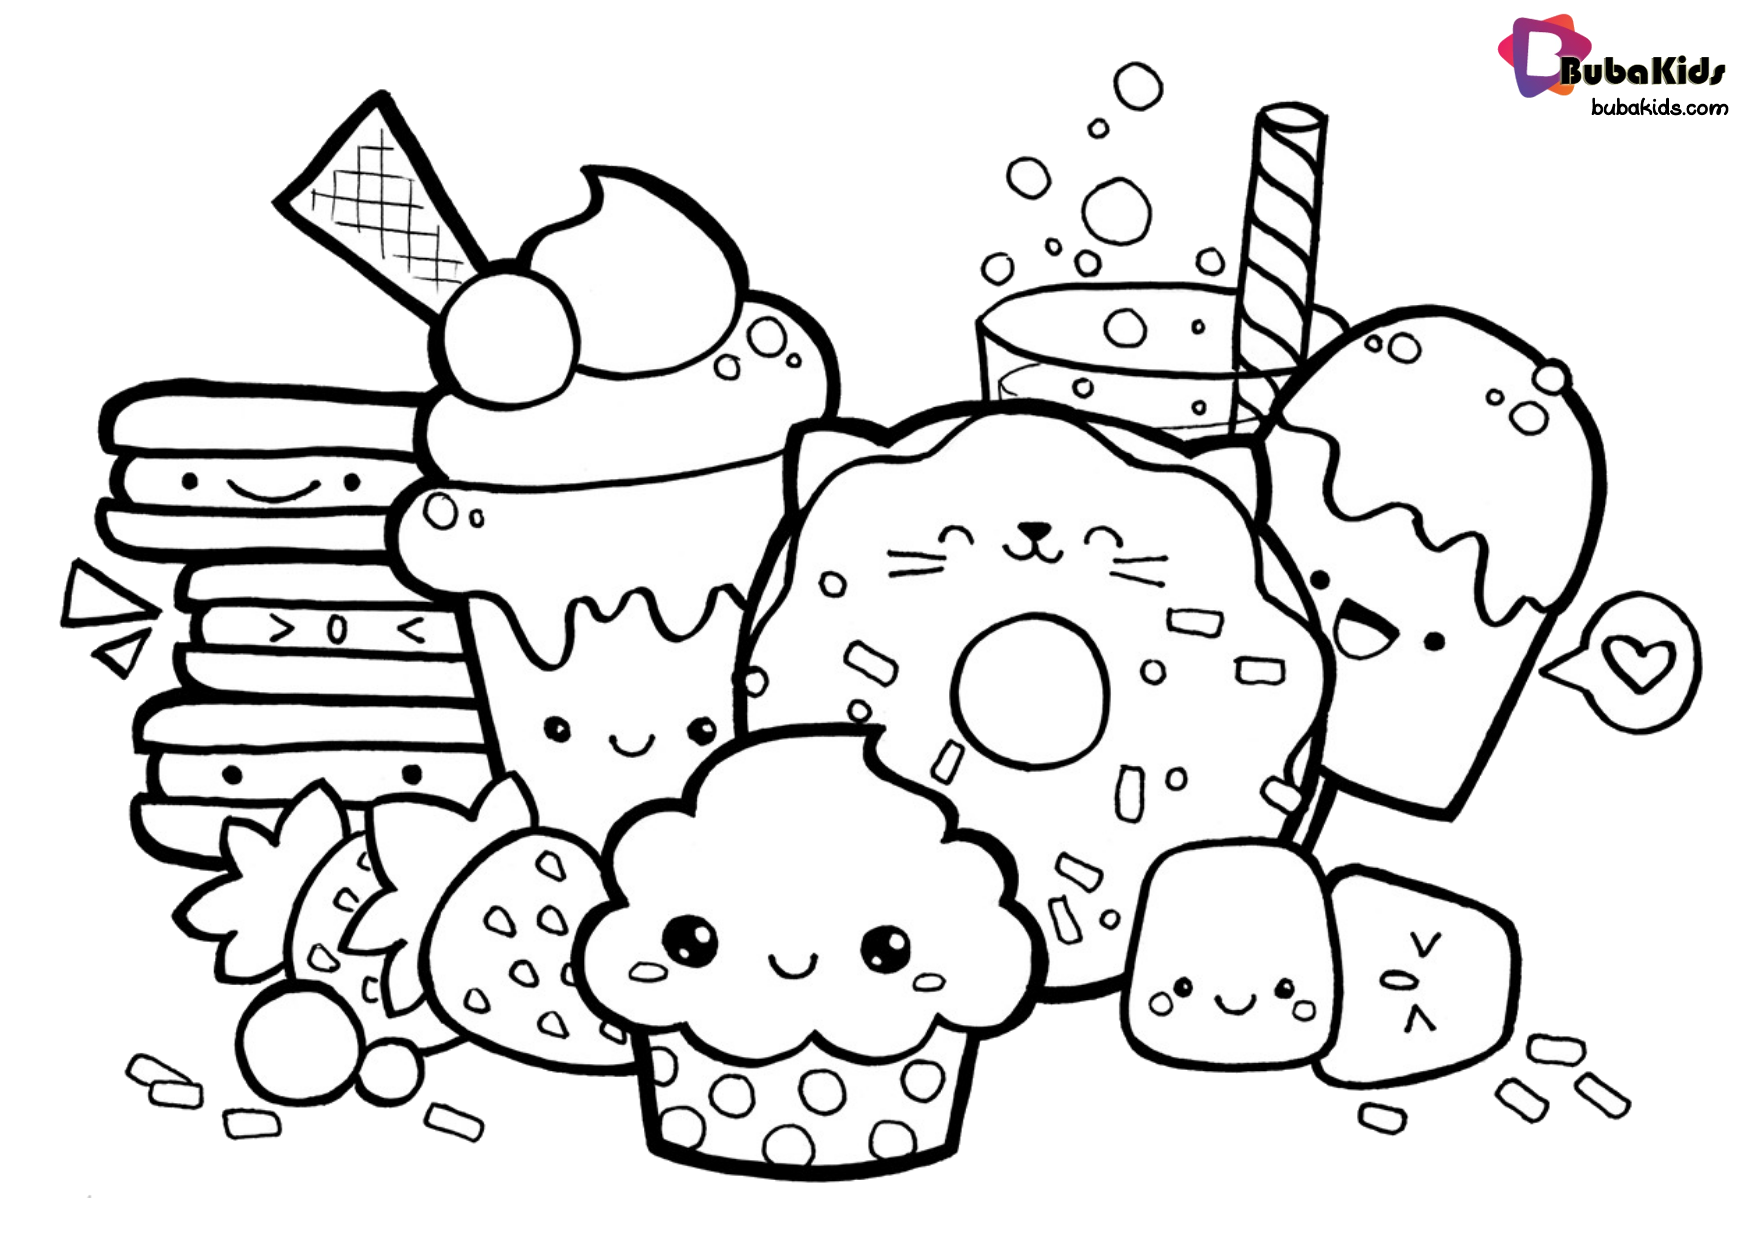 Easy And Simple Food Coloring Pages For Kids Collection Of Cartoon Coloring Pages For